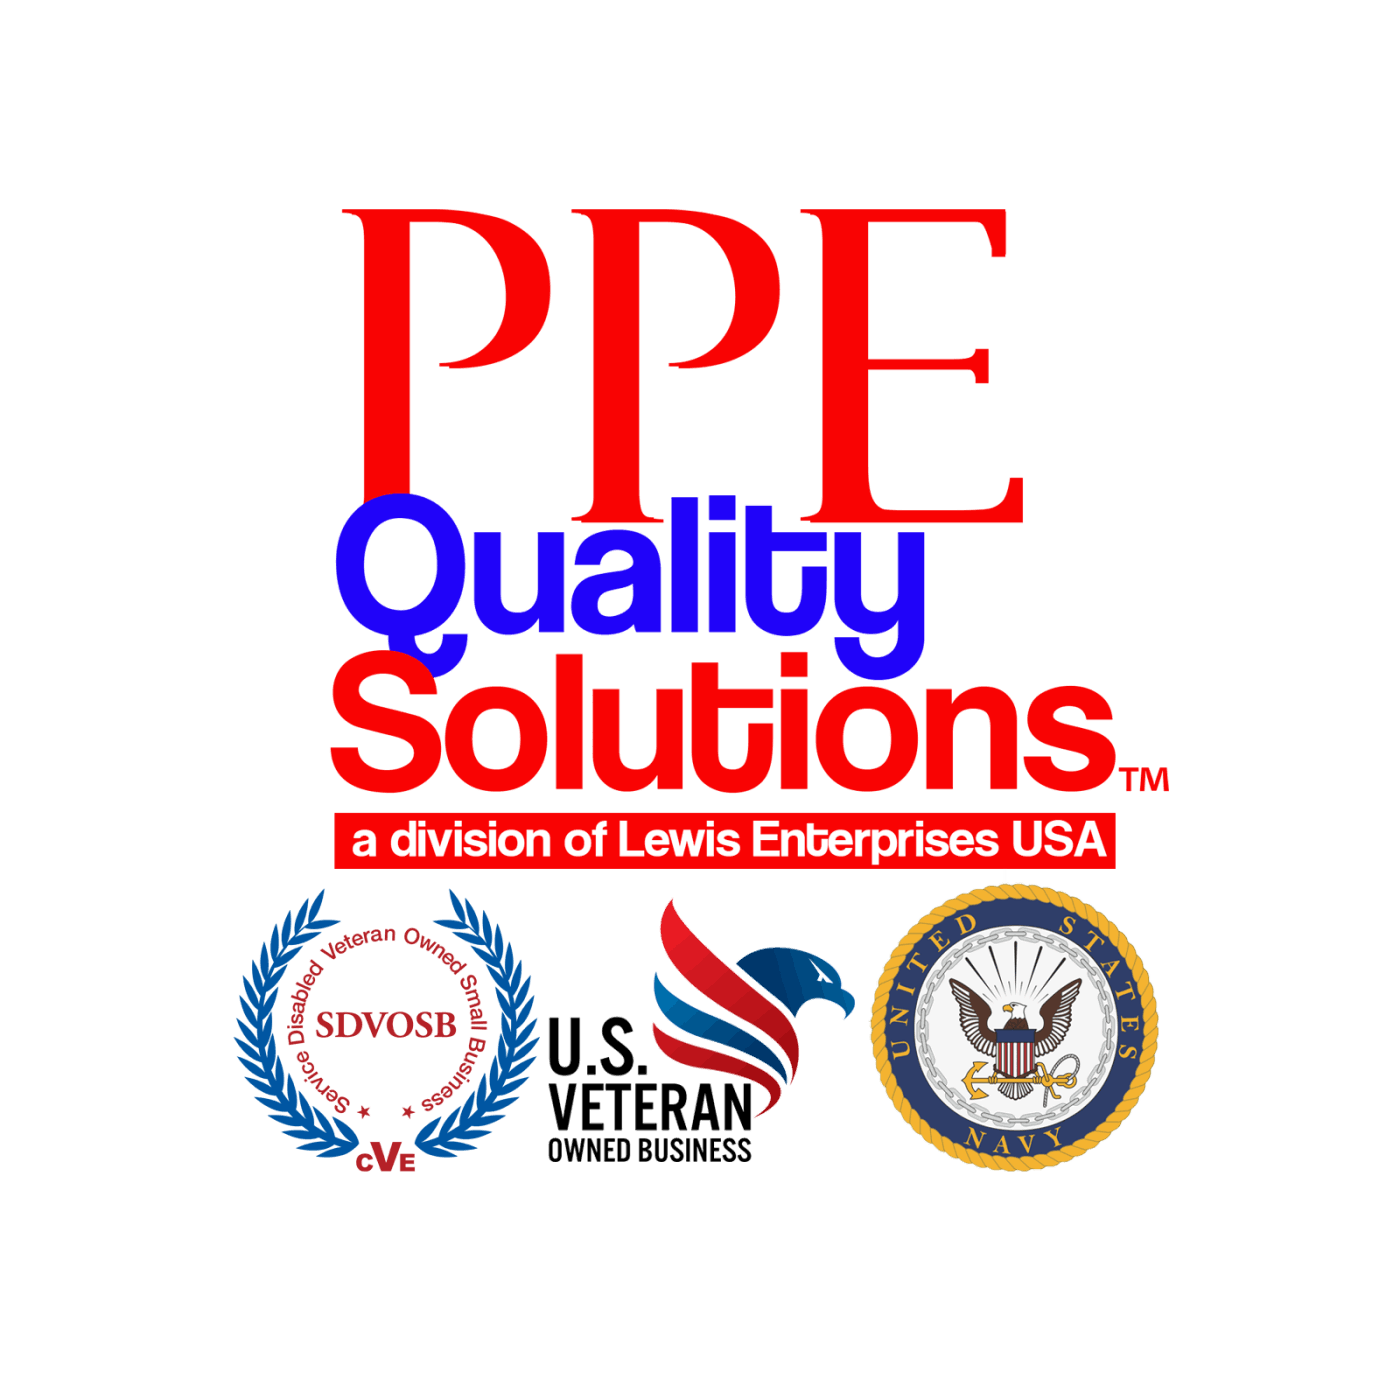 Visit our site for PPE - a division of Lewis Enterprises USA